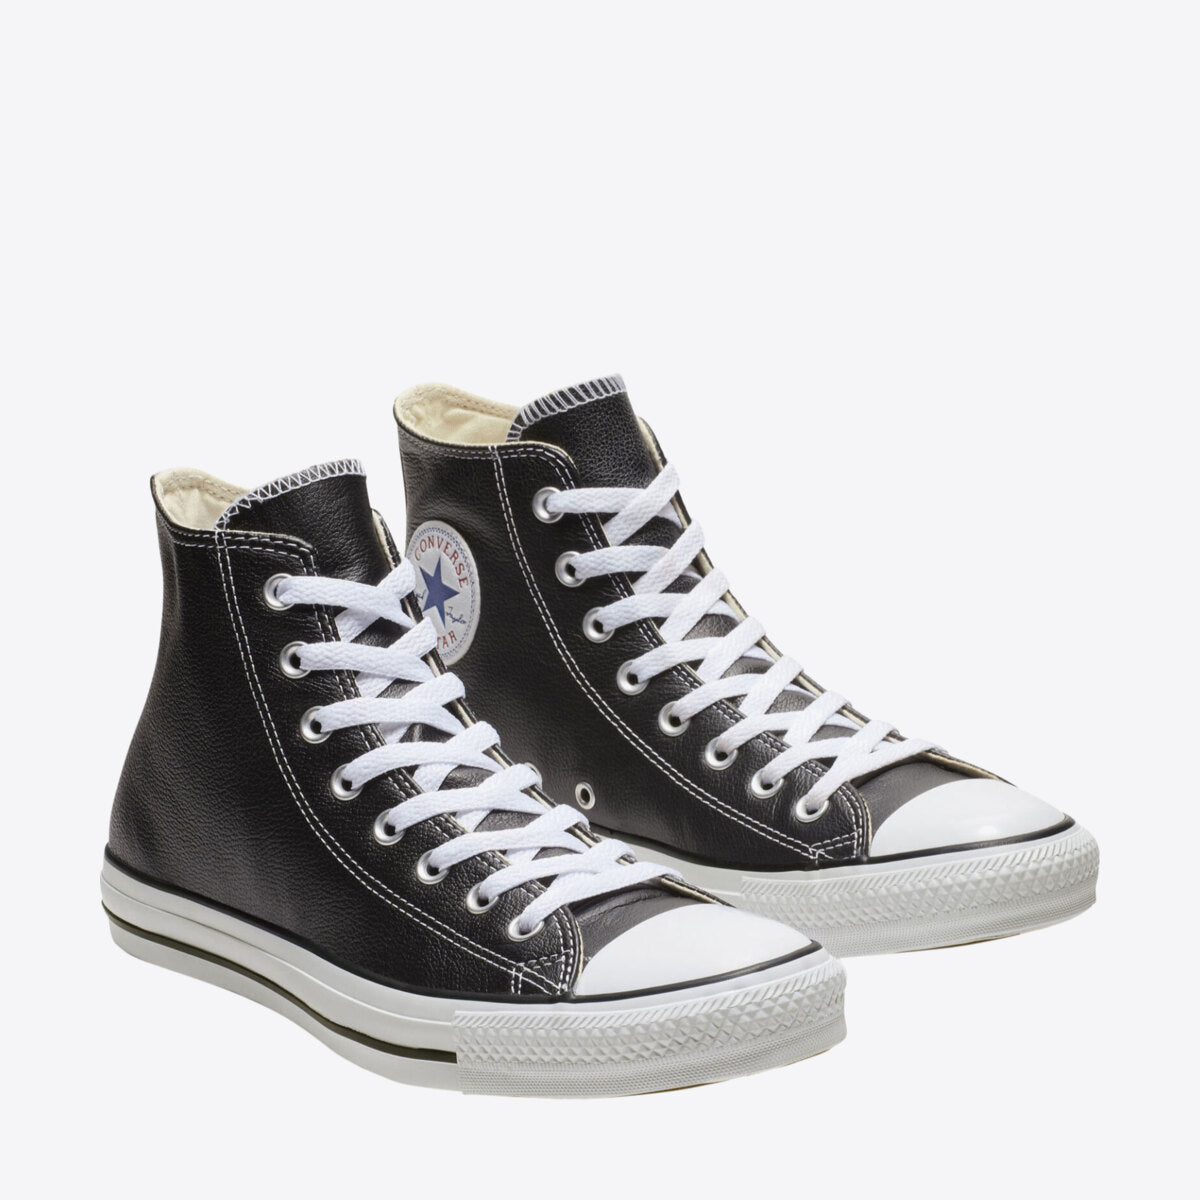 Taylor All Star Leather High Top | NZ